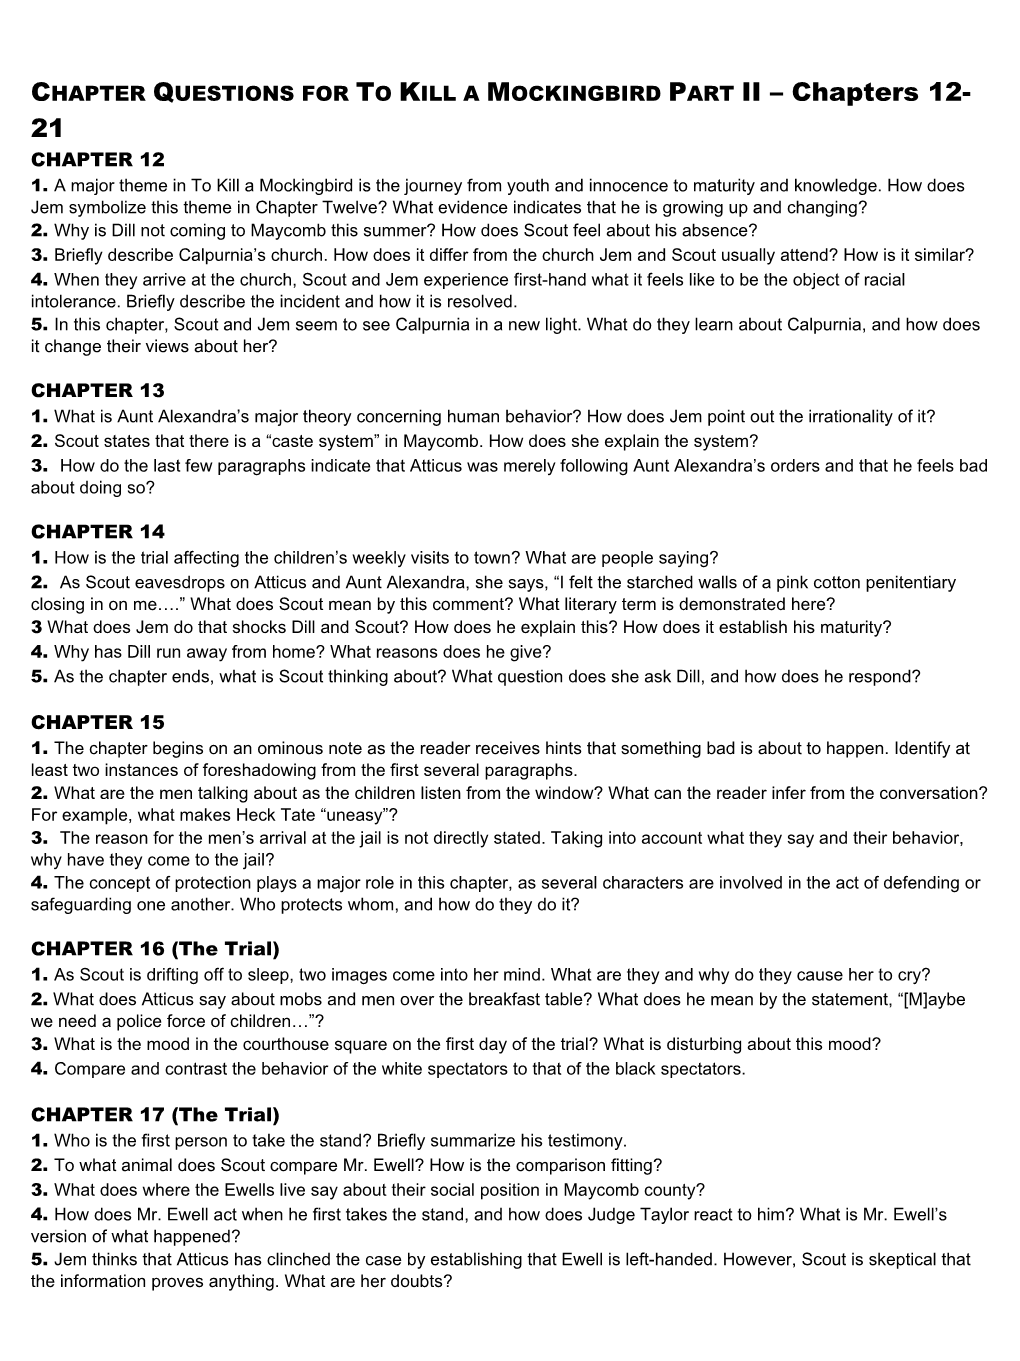 CHAPTER QUESTIONS for to KILL a MOCKINGBIRD PART II Chapters 12-21